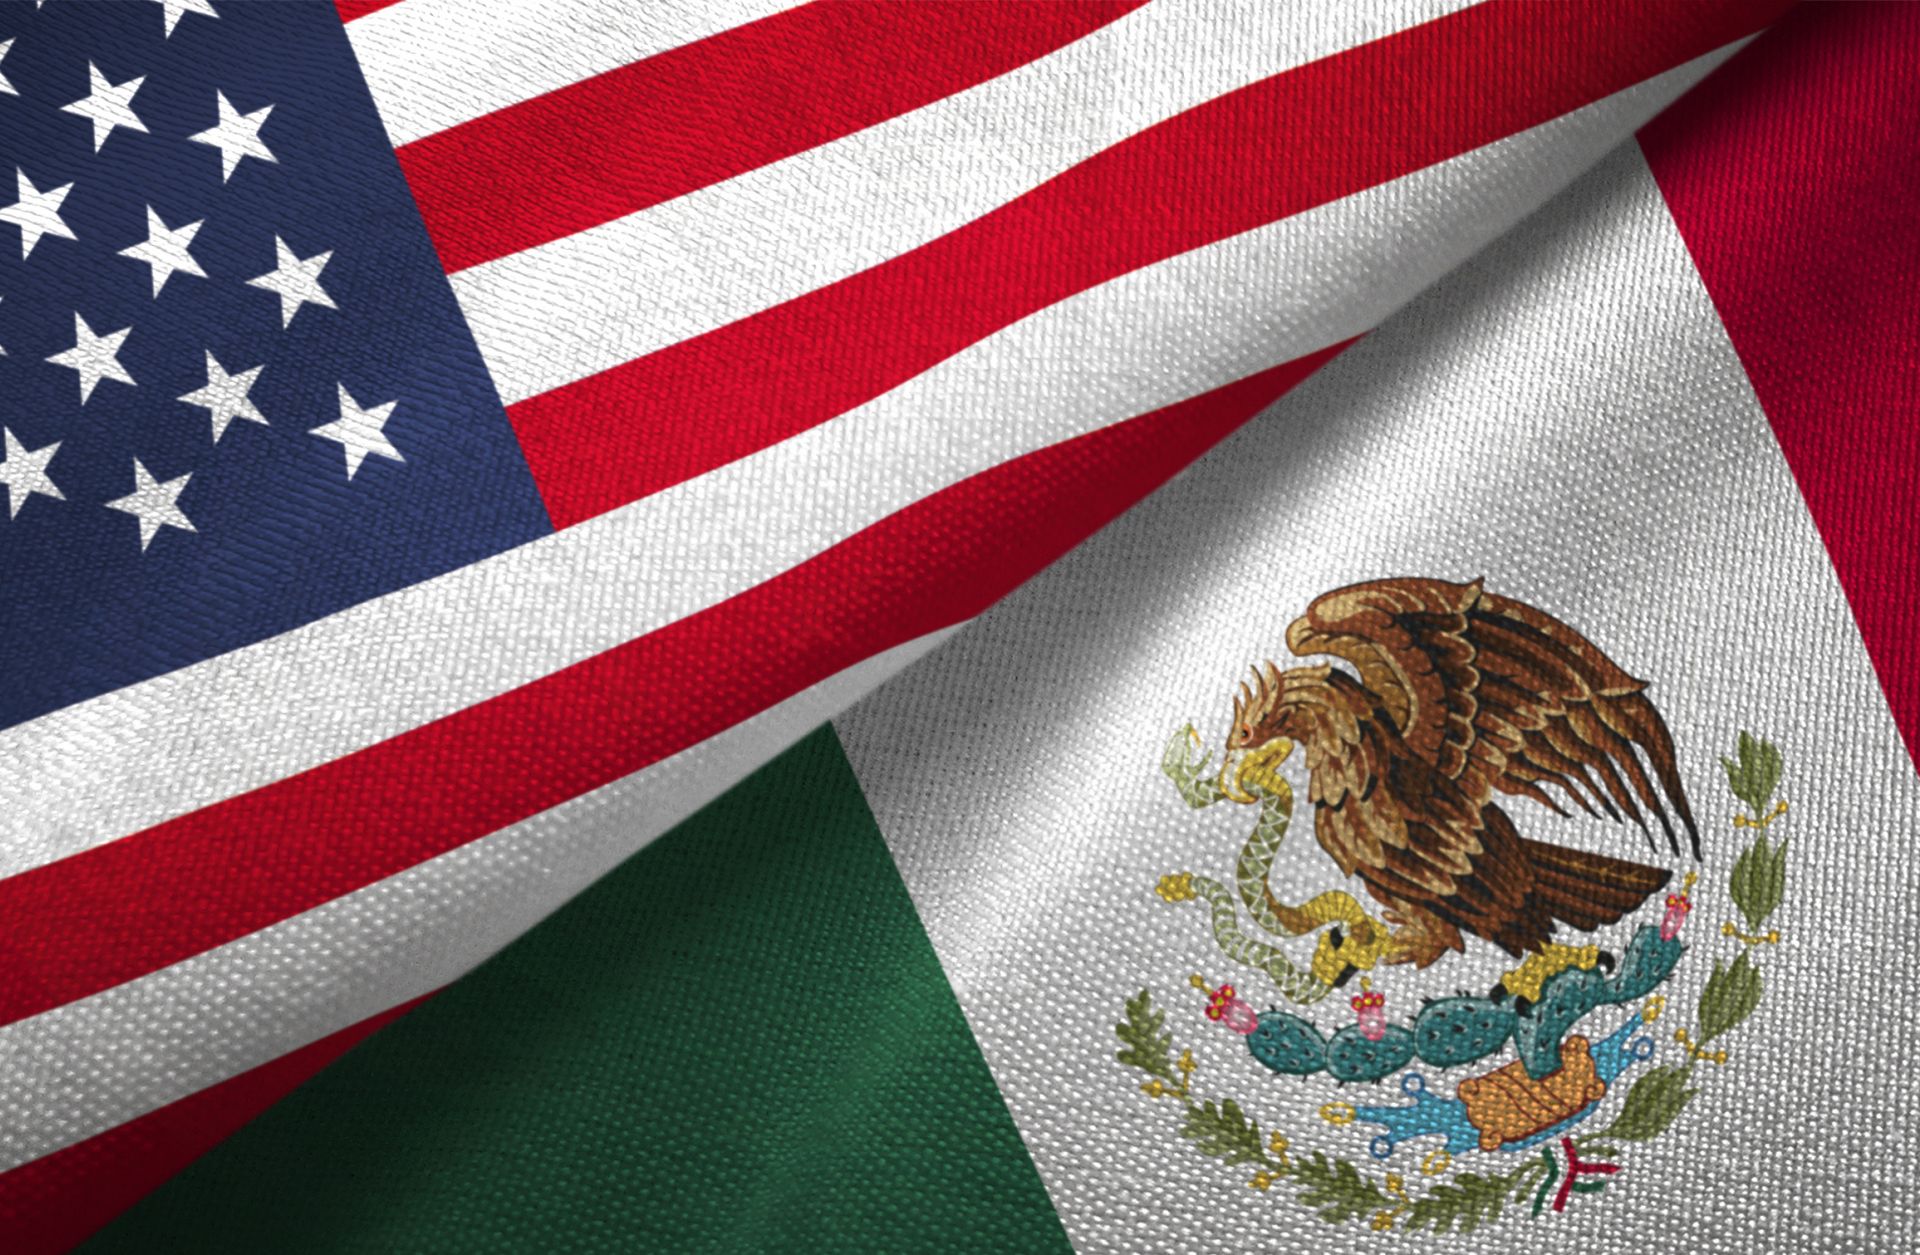 The U.S. and Mexican flags.